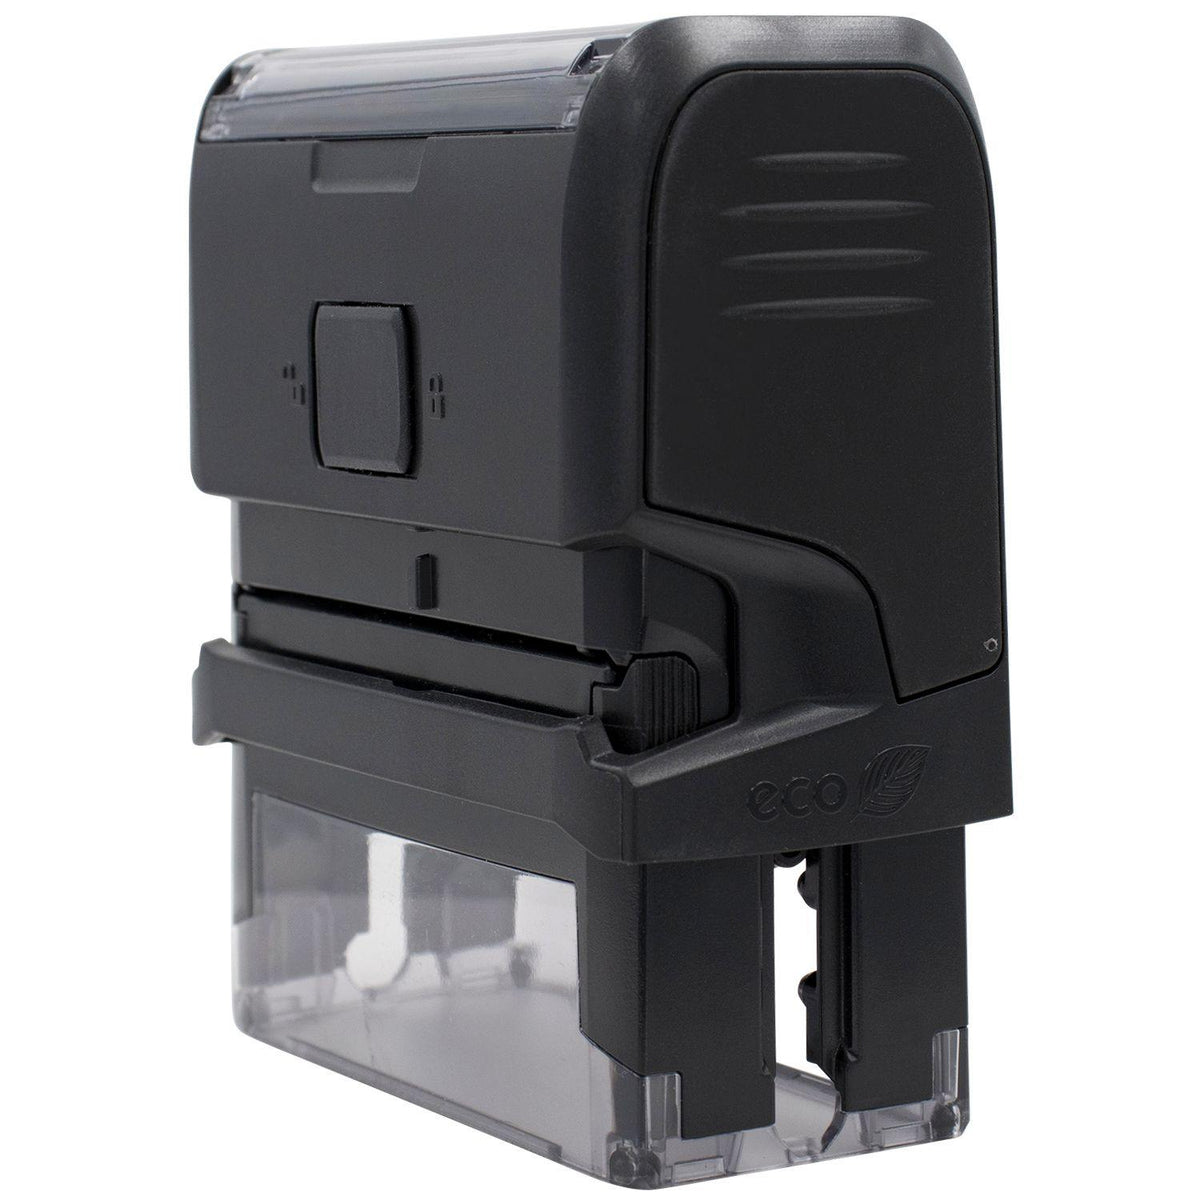 Side View of Large Self Inking Balanced Stamp at an Angle